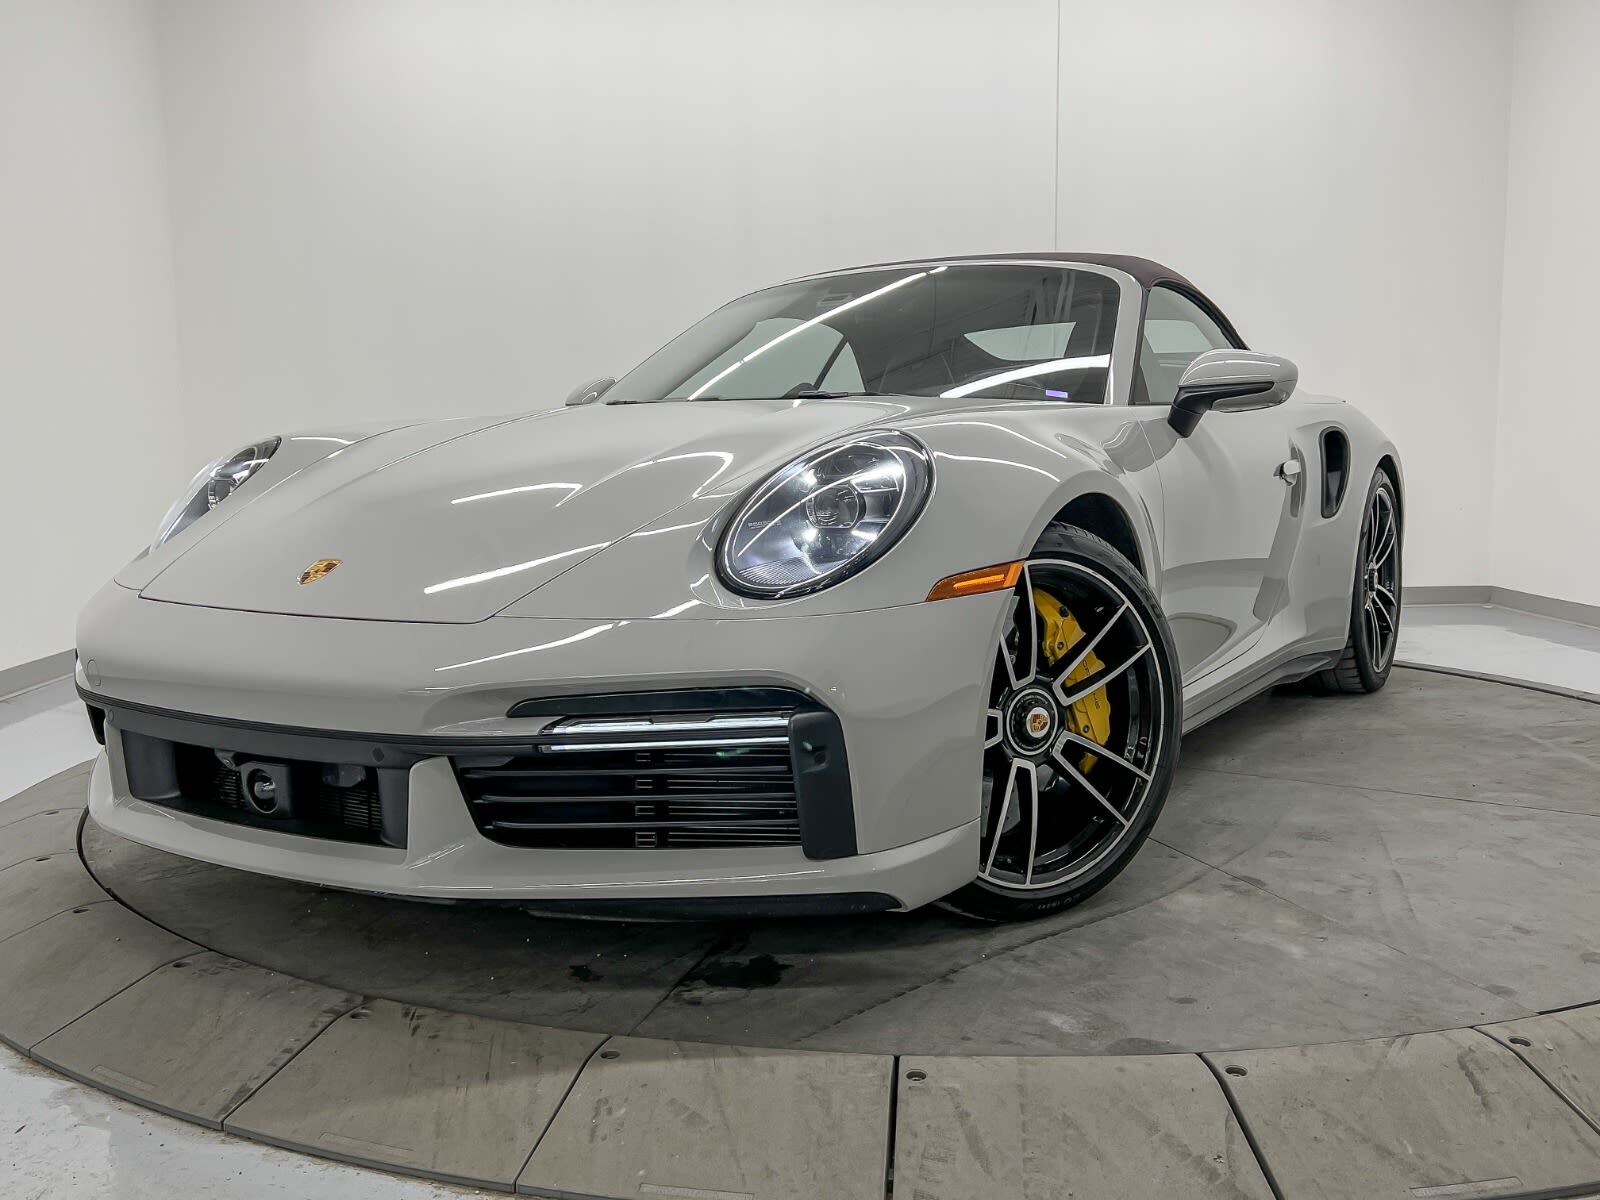 2021 Porsche 911 911 Turbo S Cabriolet | One Local Owner - No Accid